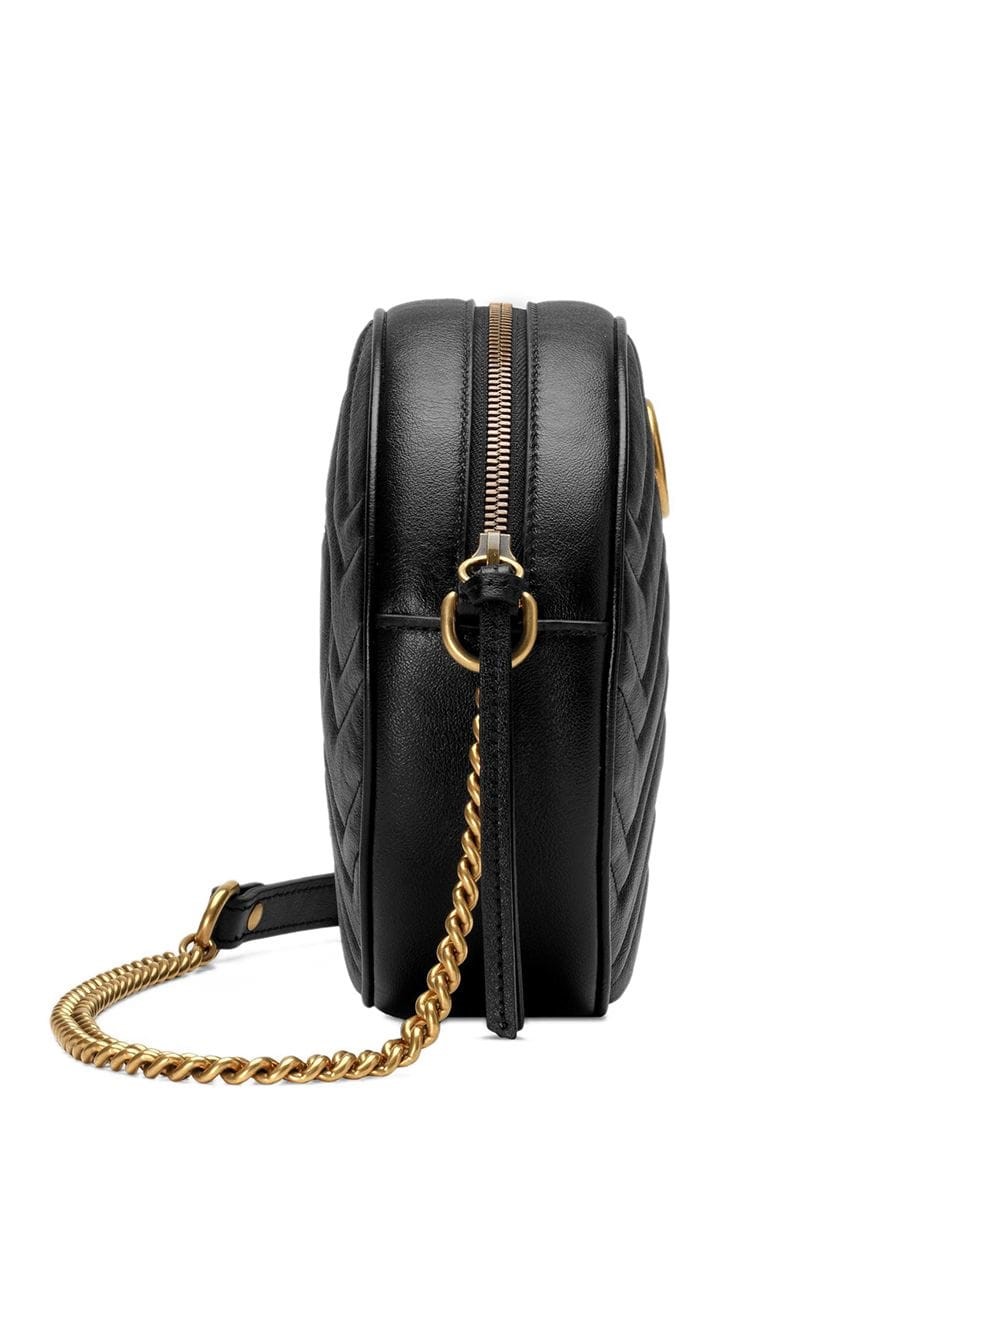 gucci GG MARMONT ROUND BAG available on literacybasics.ca - 27417